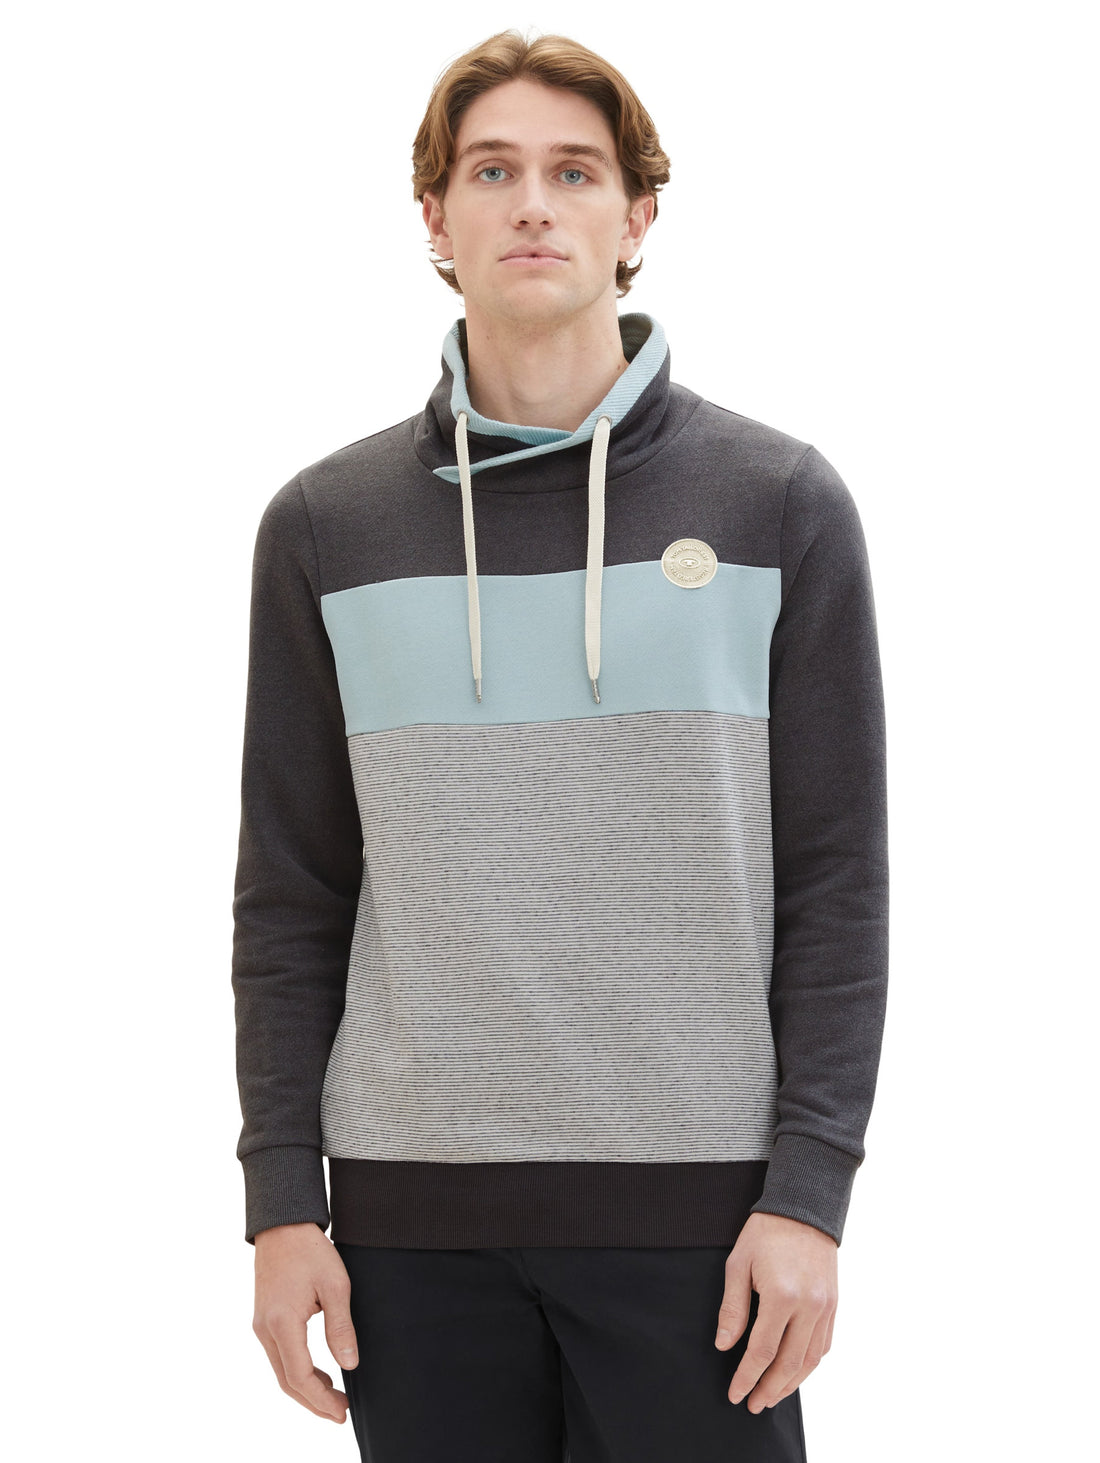 High Collar Hoodie With Color Block Design_1037761_11086_02